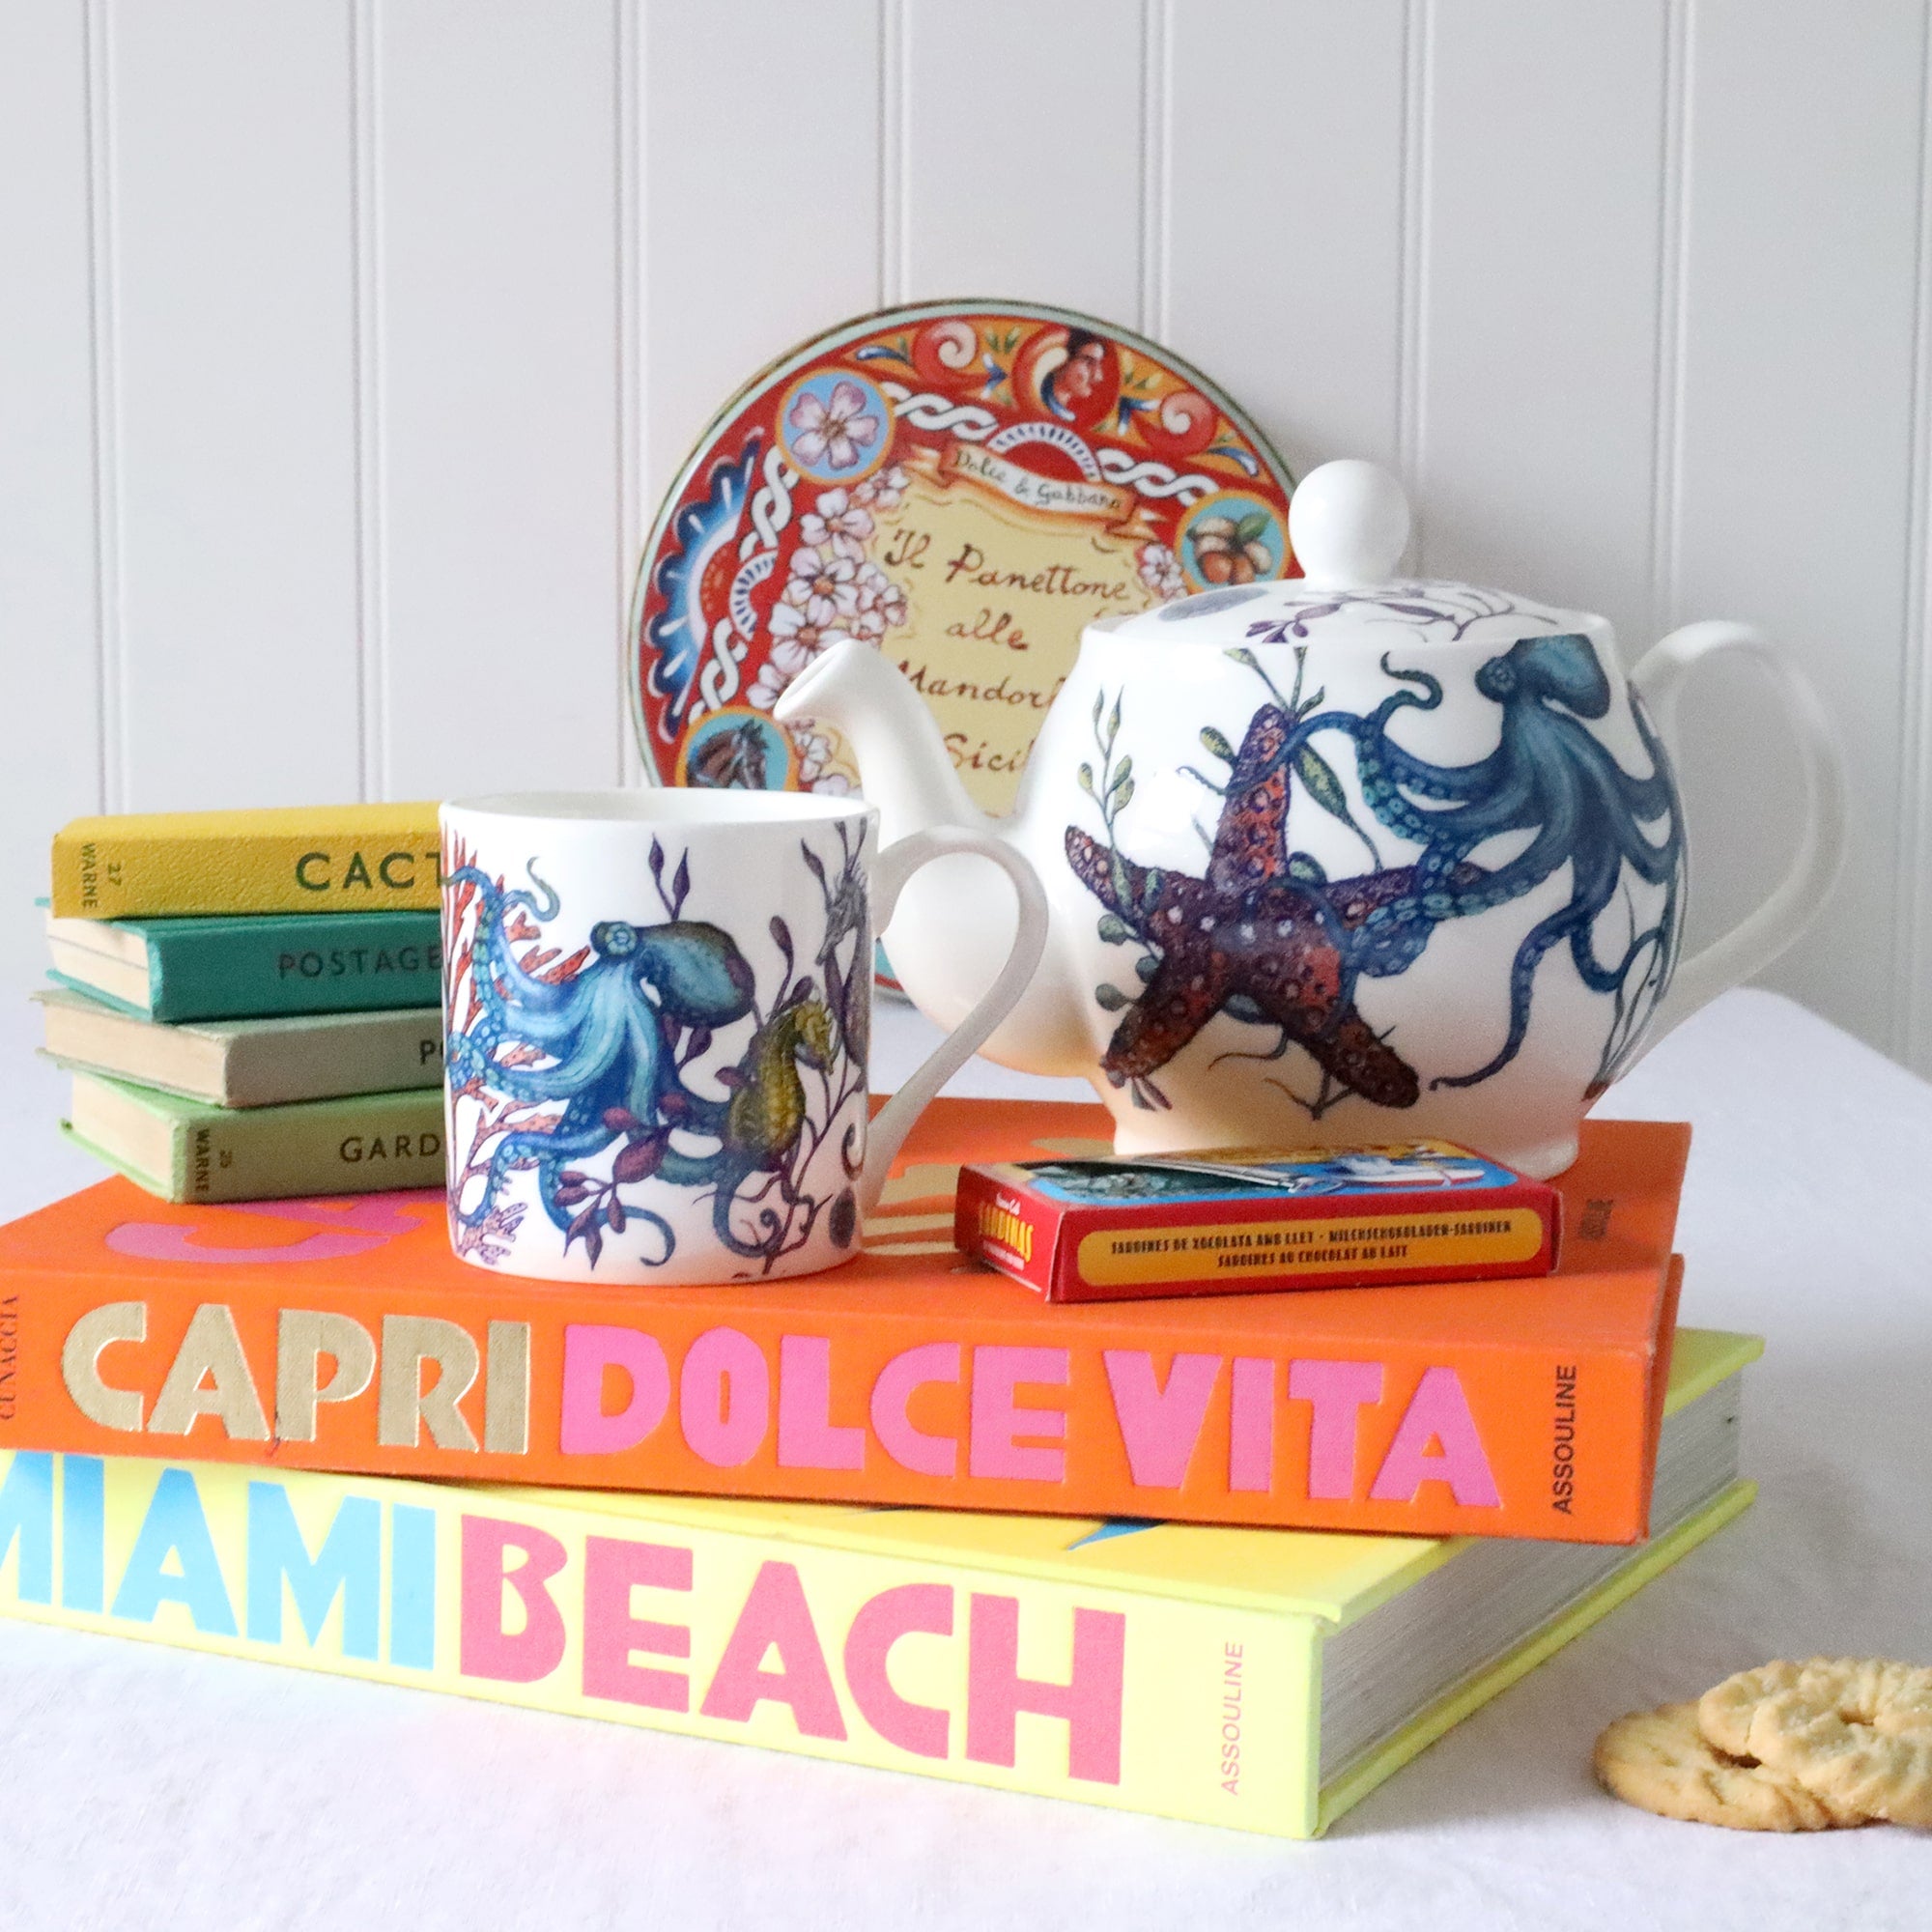  brightly coloured mug and teapot with reef design of many brightly coloured sea creatures. These are sitting on a table with brightly coloured books & panettone tin int he backgound.